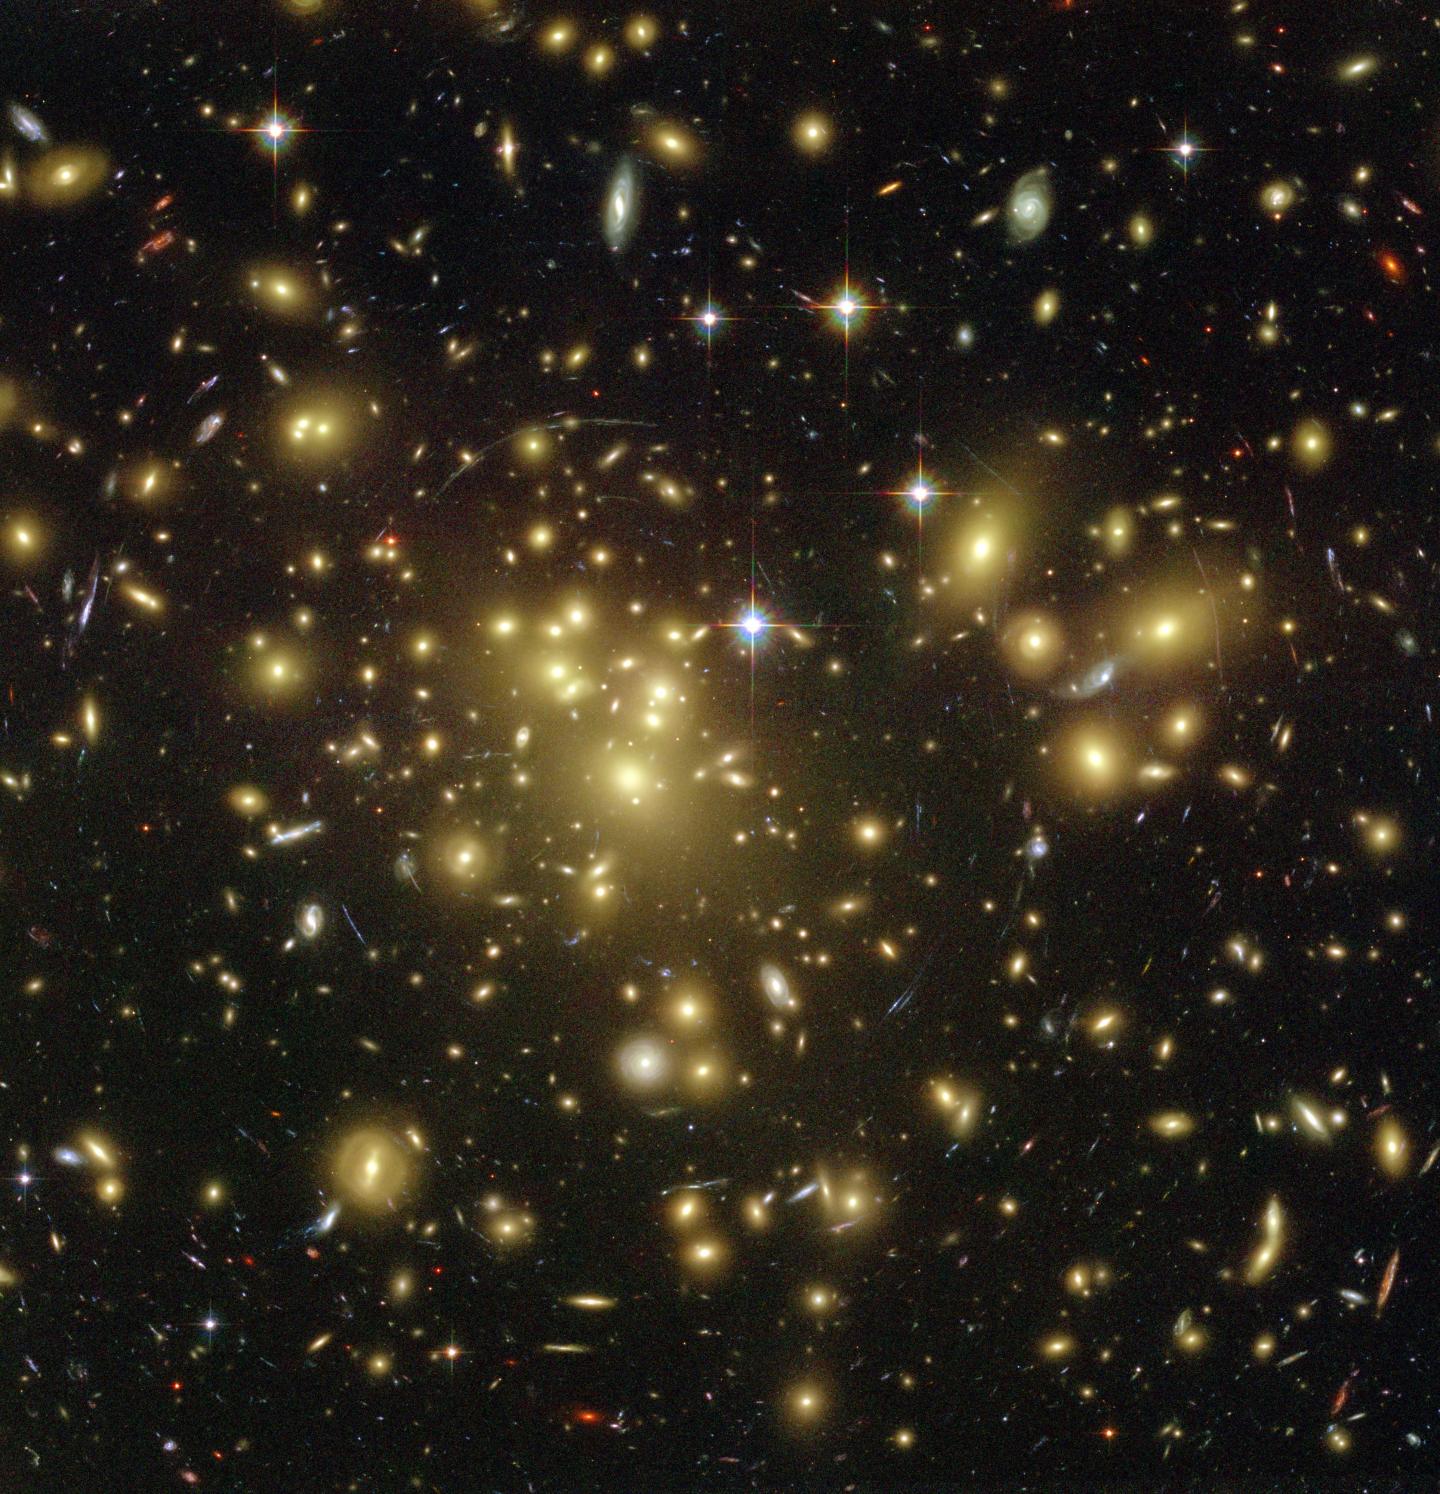 Galaxy Cluster Abell1689